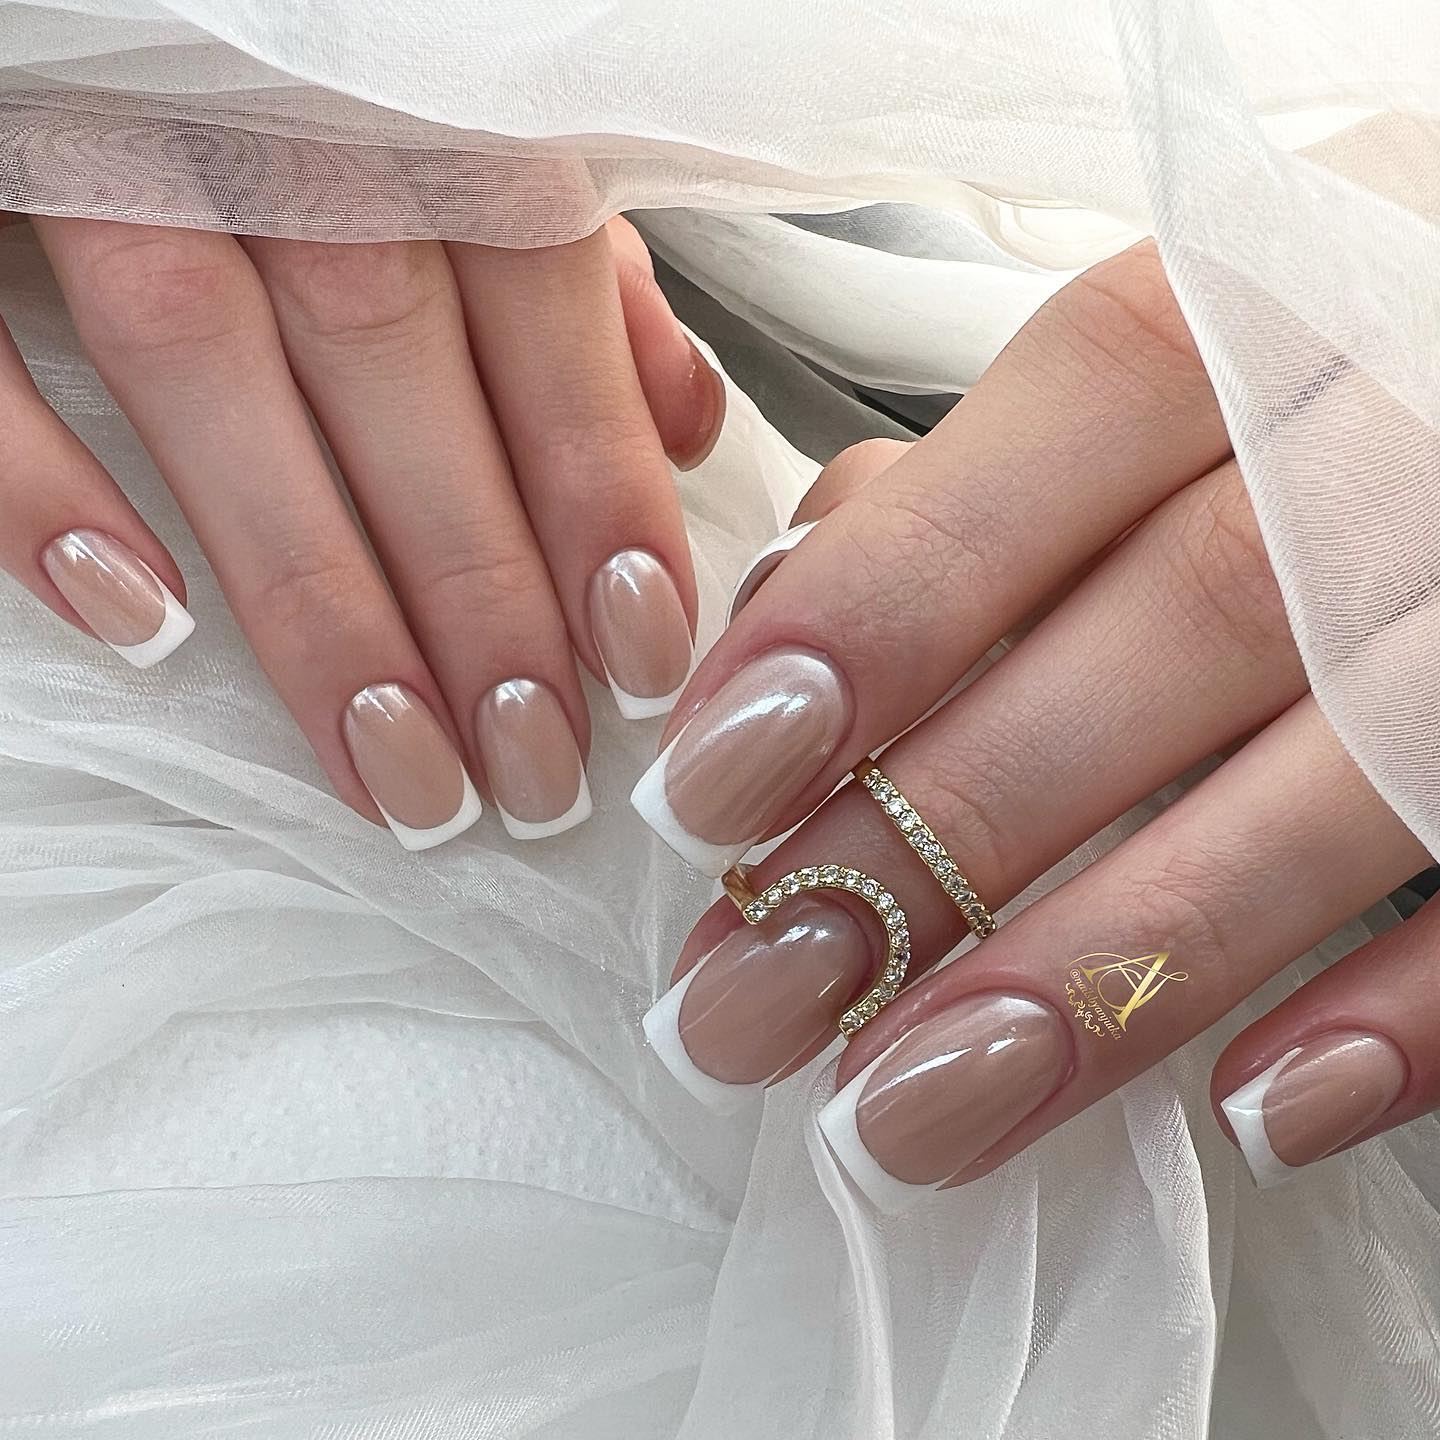 French Manicure met glanzende topcoat